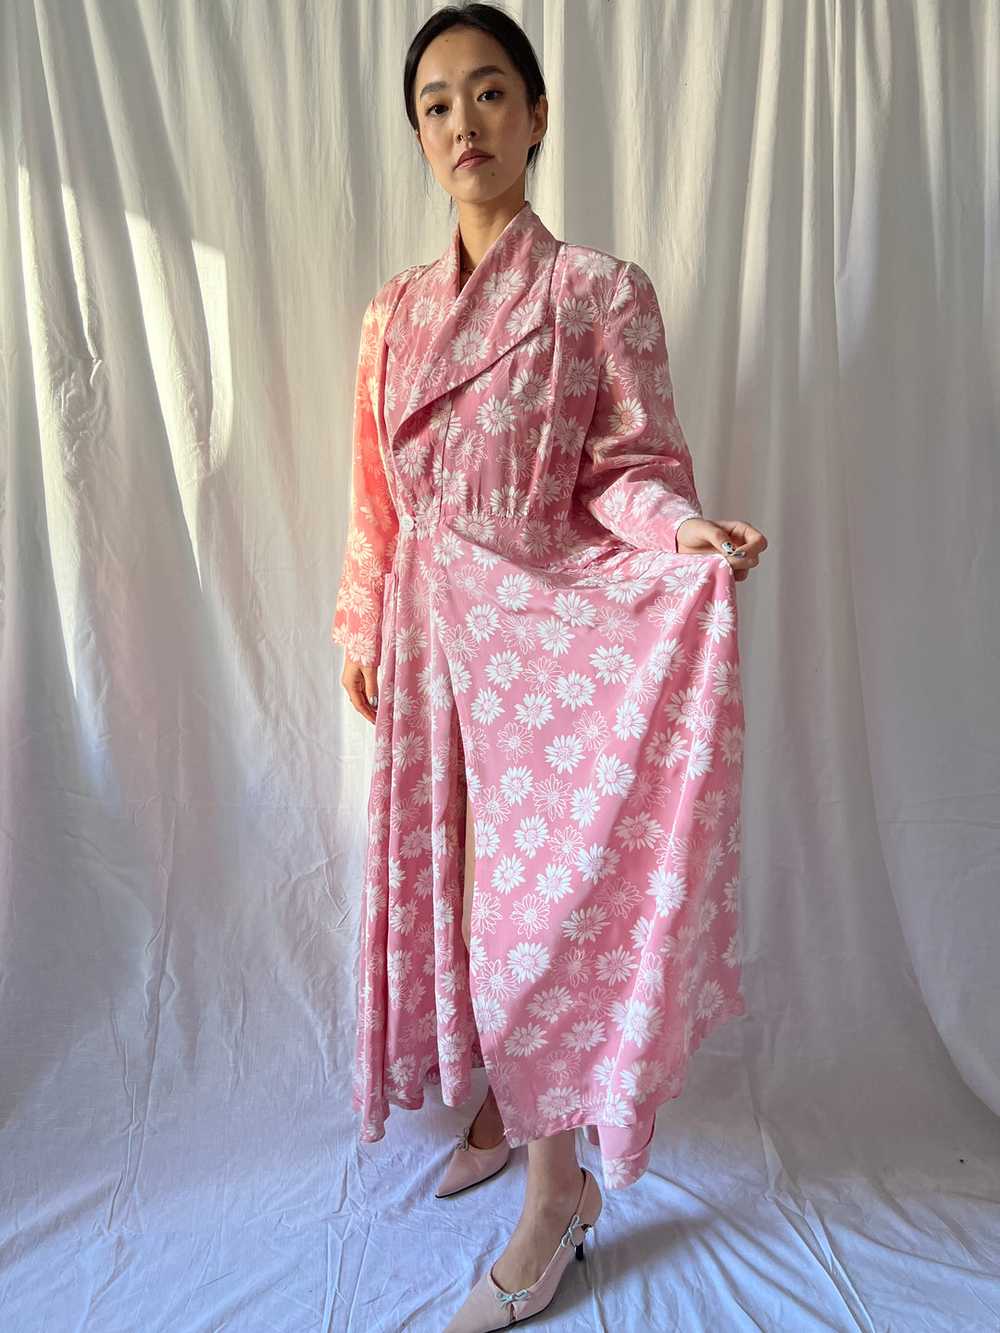 Vintage 1930s pink daisies gown robe - image 8